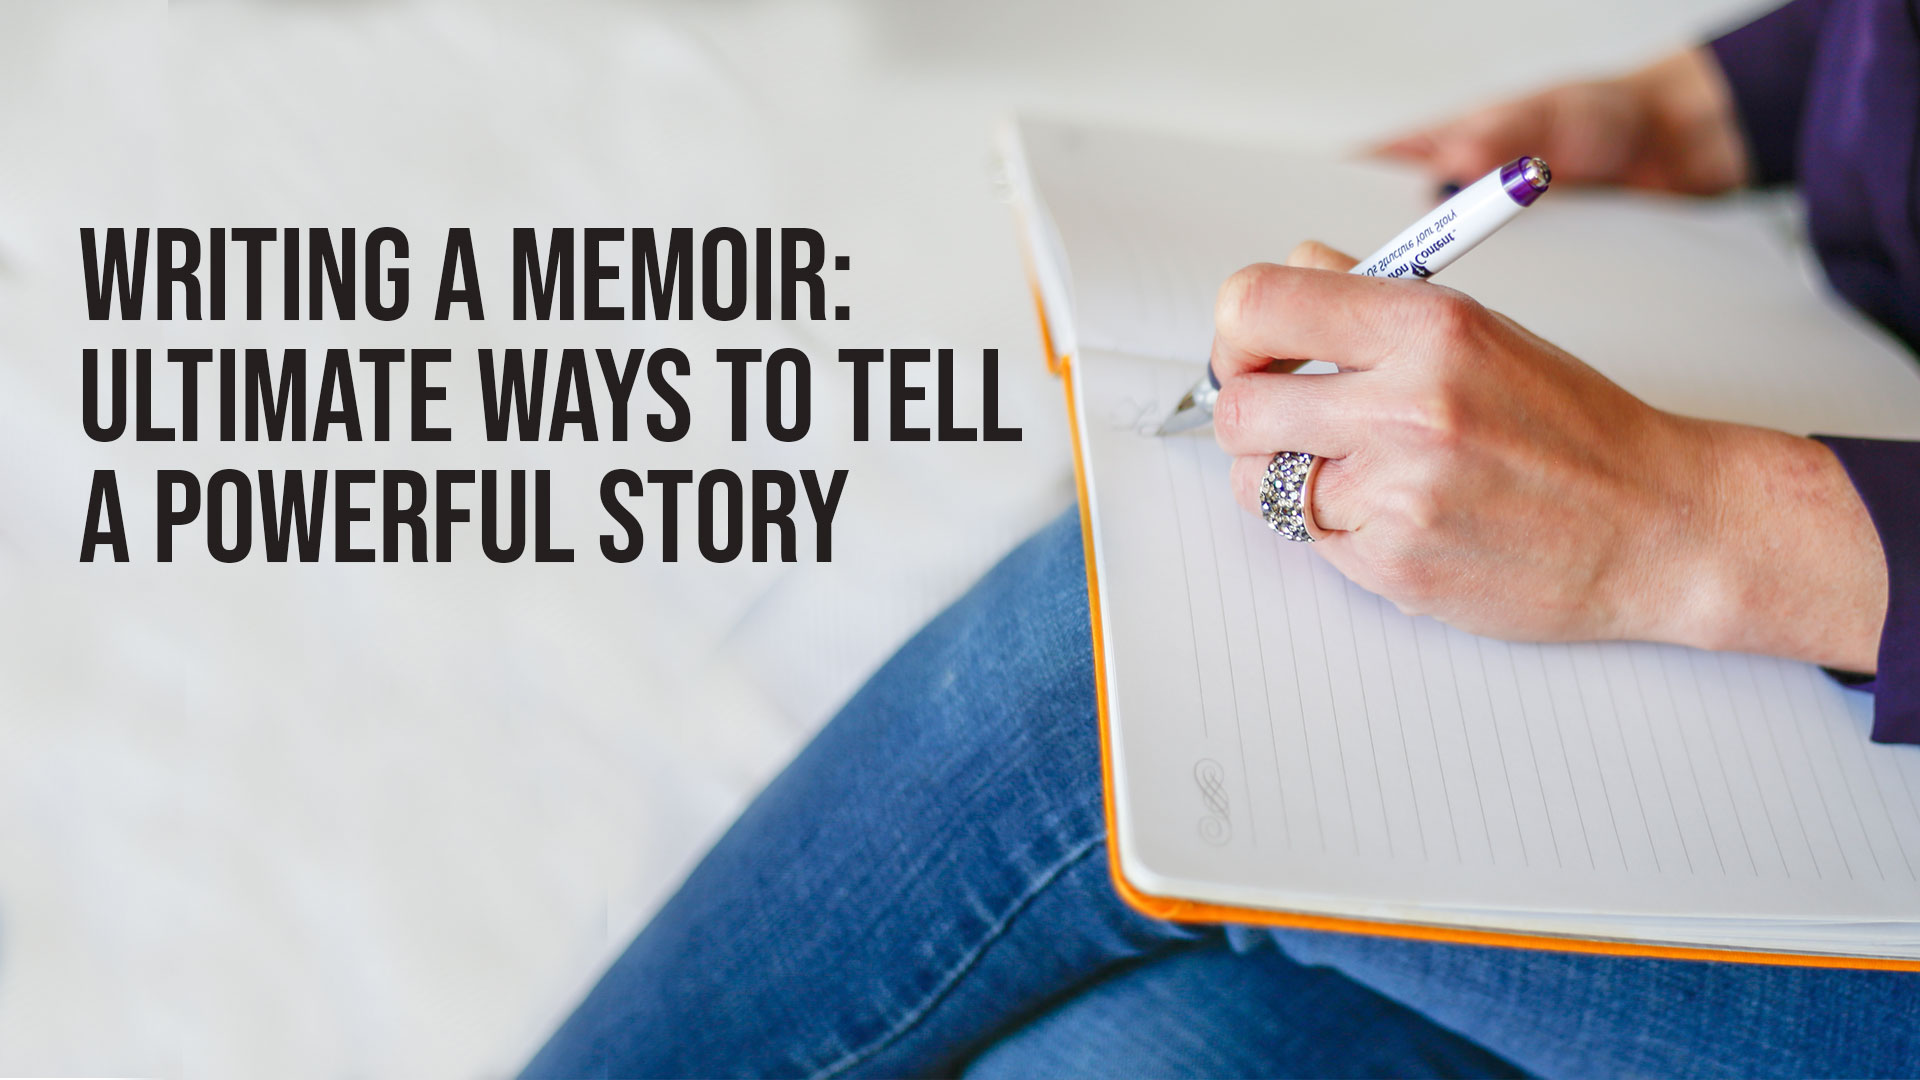 Writing a Memoir: Ultimate Ways to Tell a Powerful Story